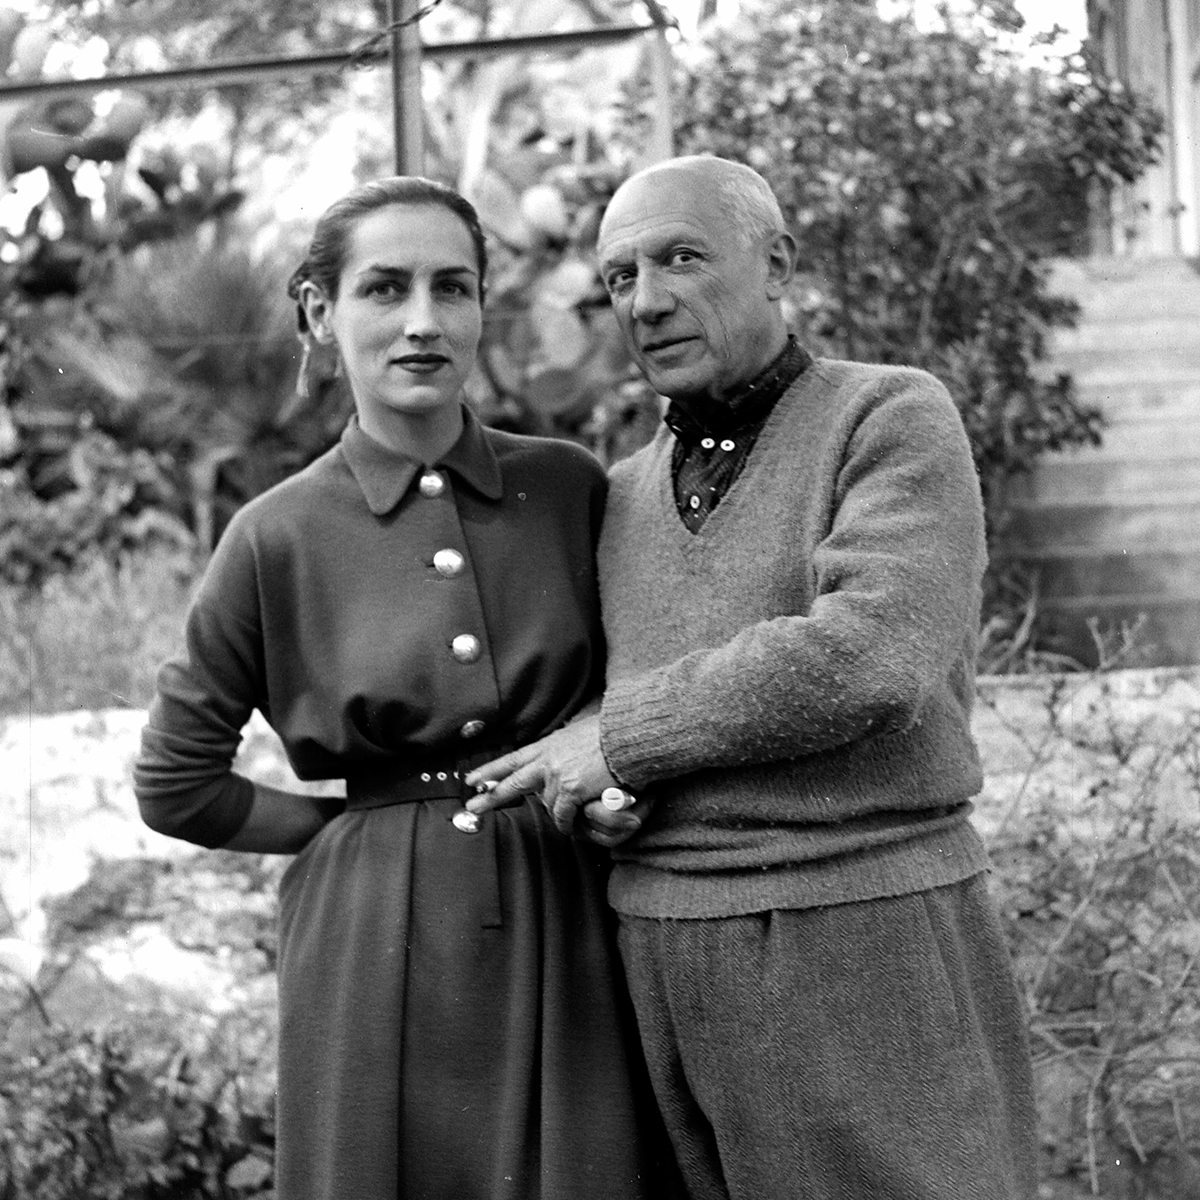 Pablo Picasso and Francoise Gillot